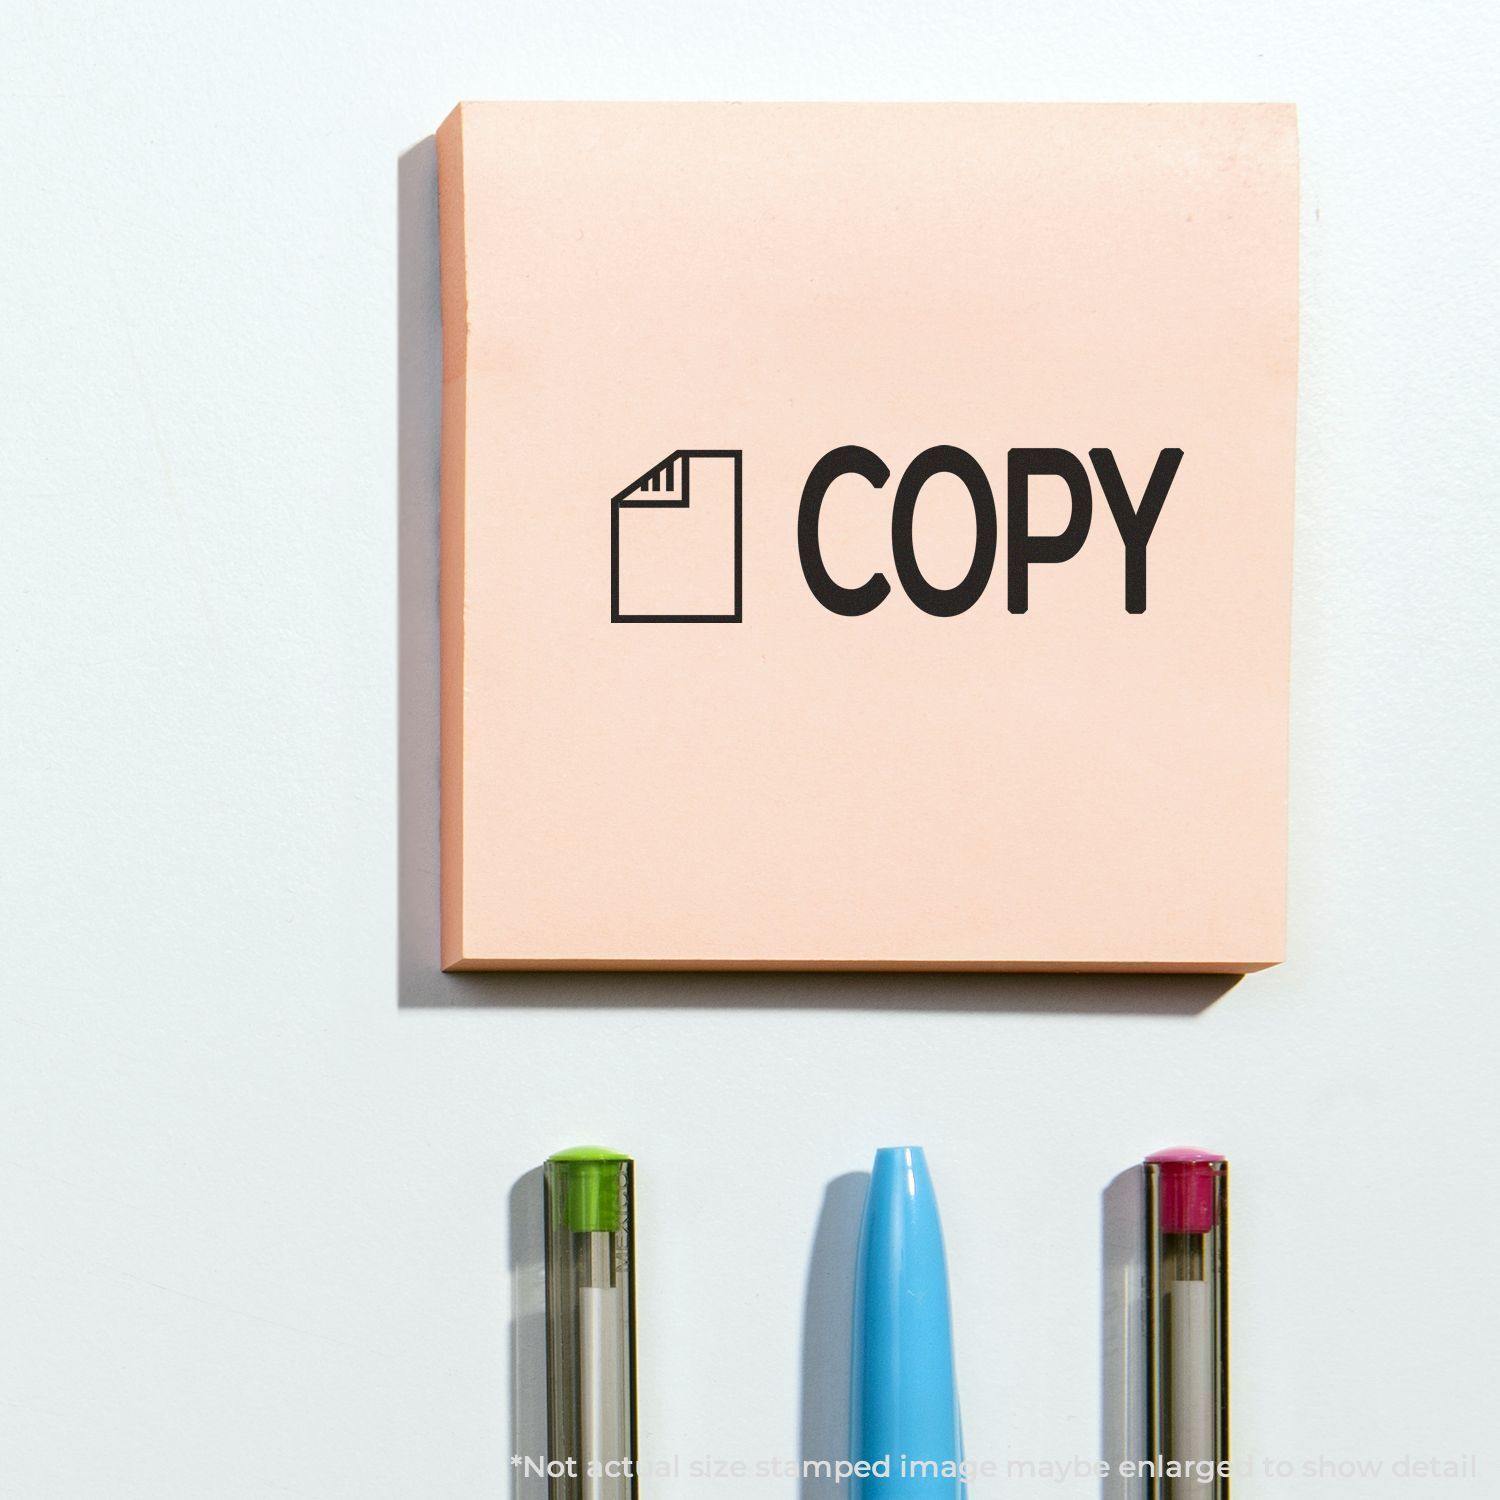 A self-inking stamp with a stamped image showing how the text "COPY" in a large bold font with a small image of a letter is displayed after stamping.